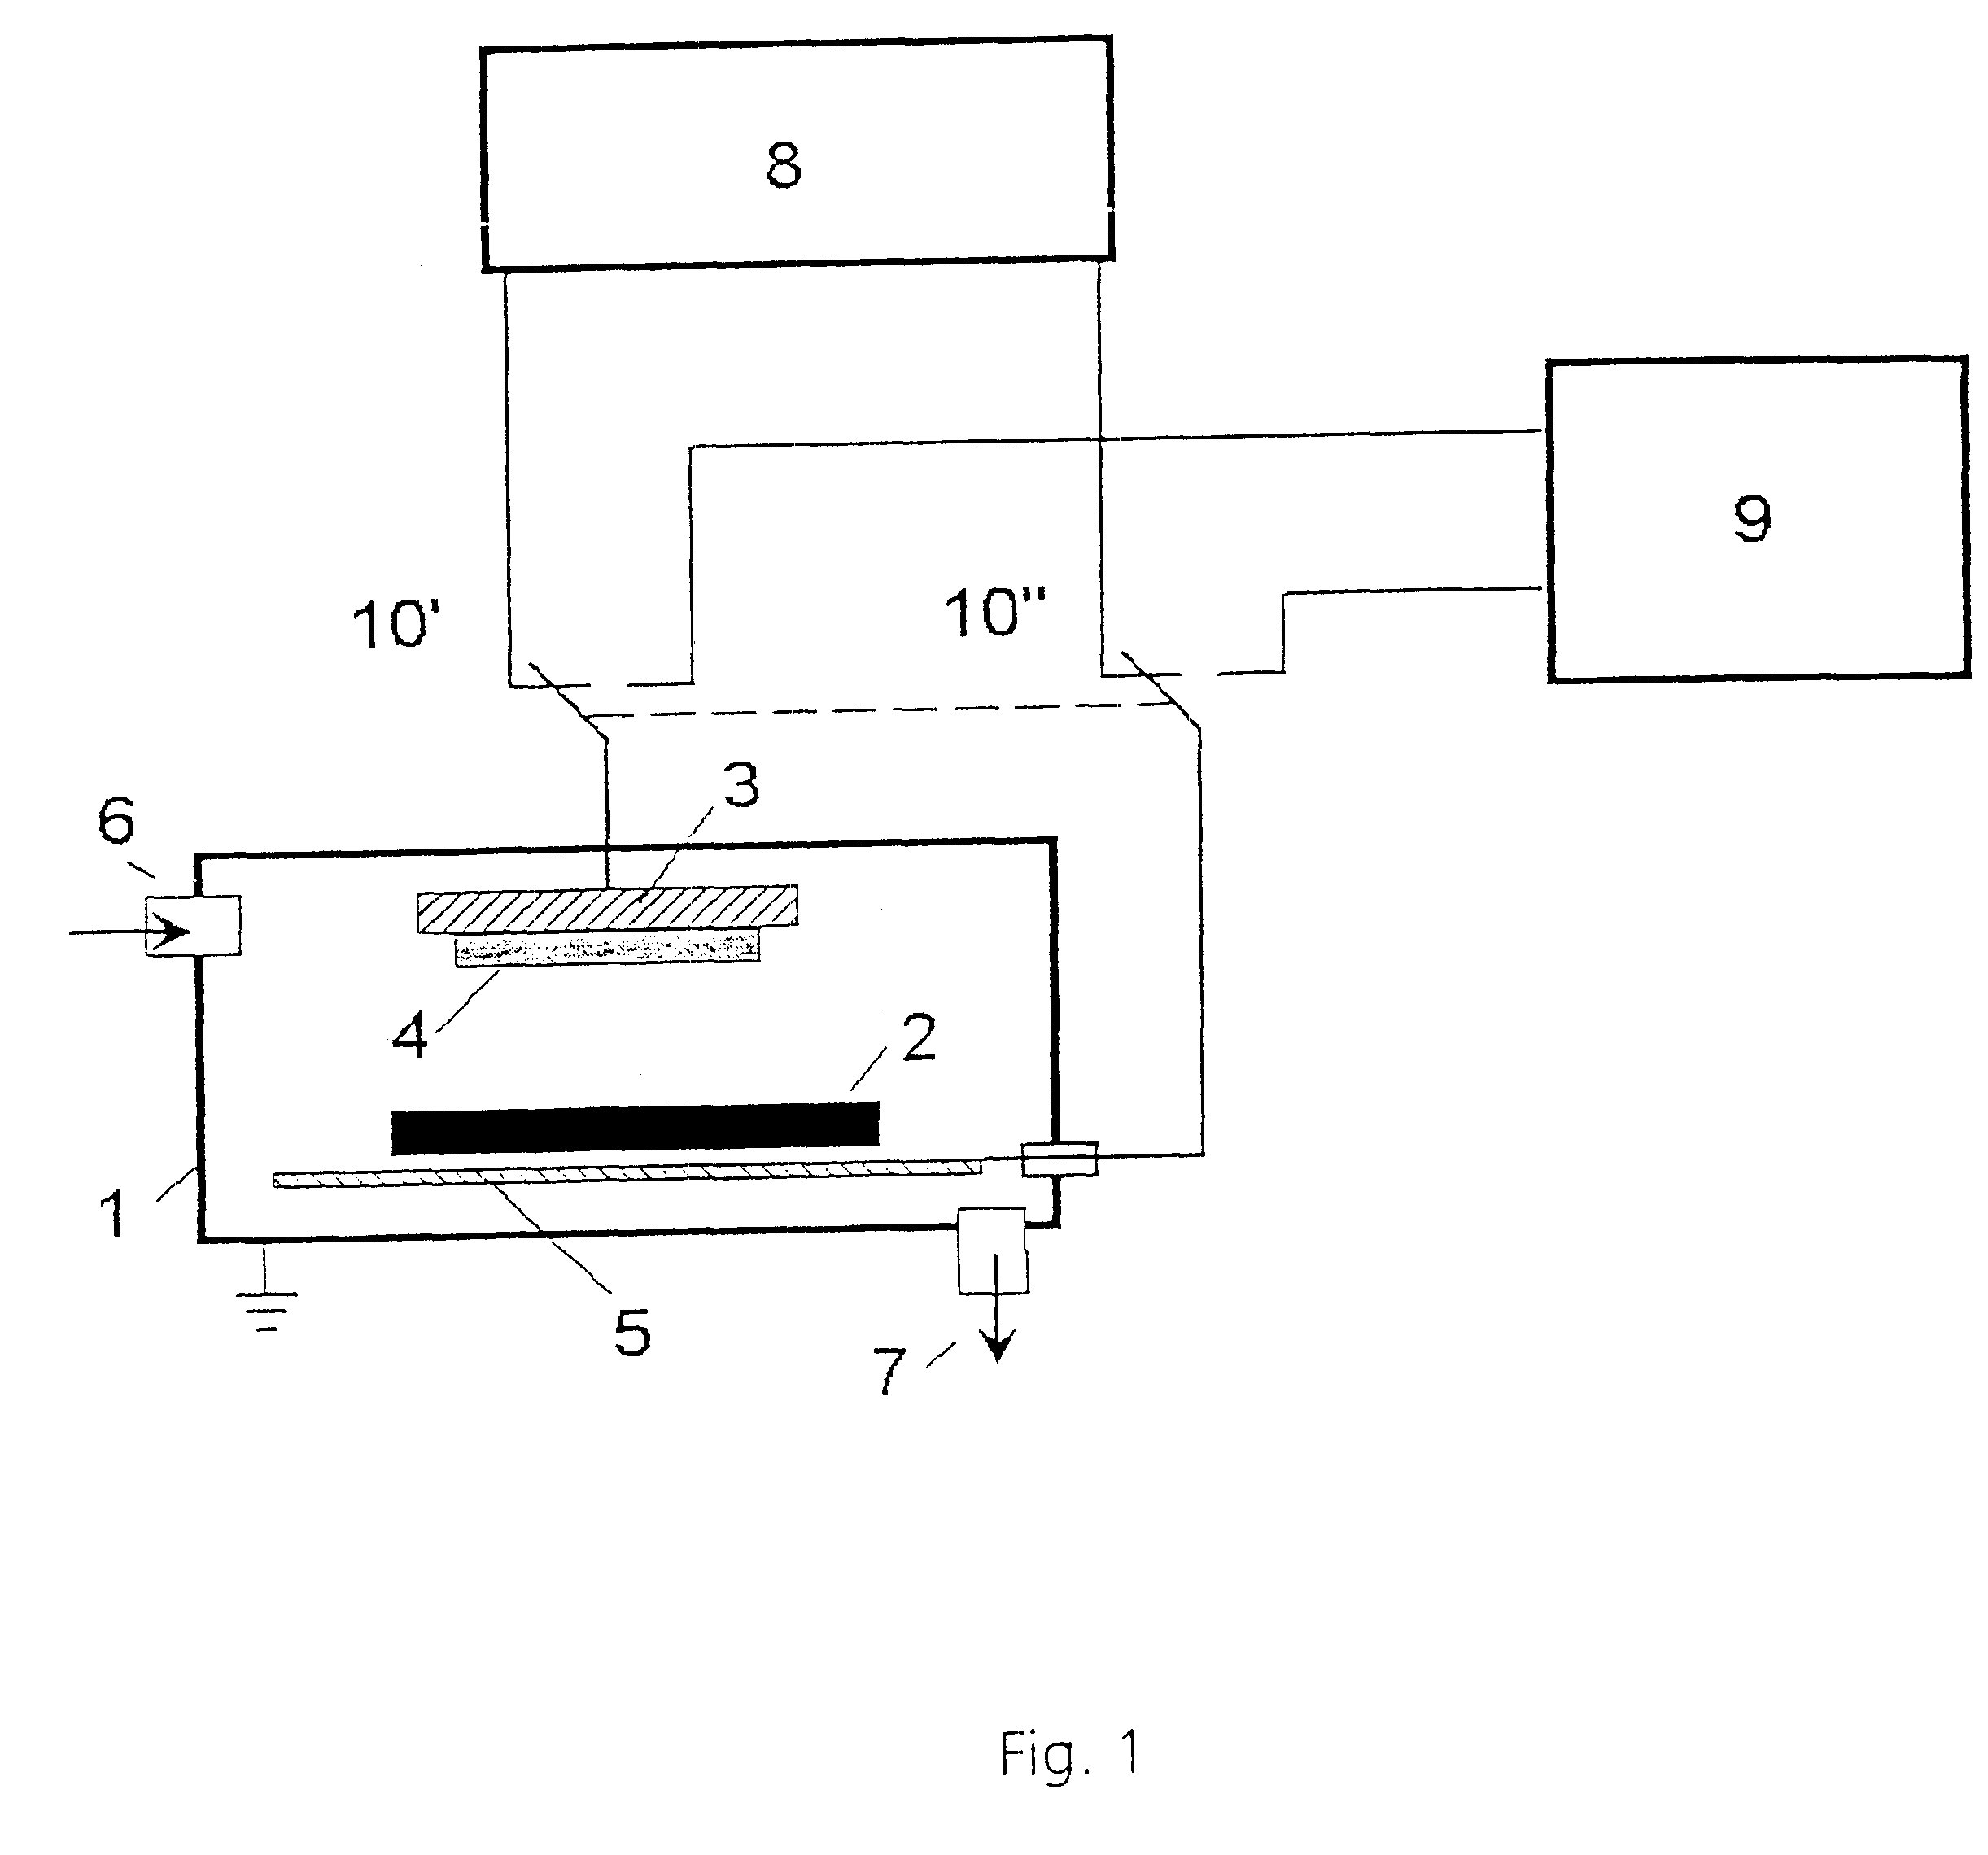 Process and device for reducing the ignition voltage of plasmas operated using pulses of pulsed power